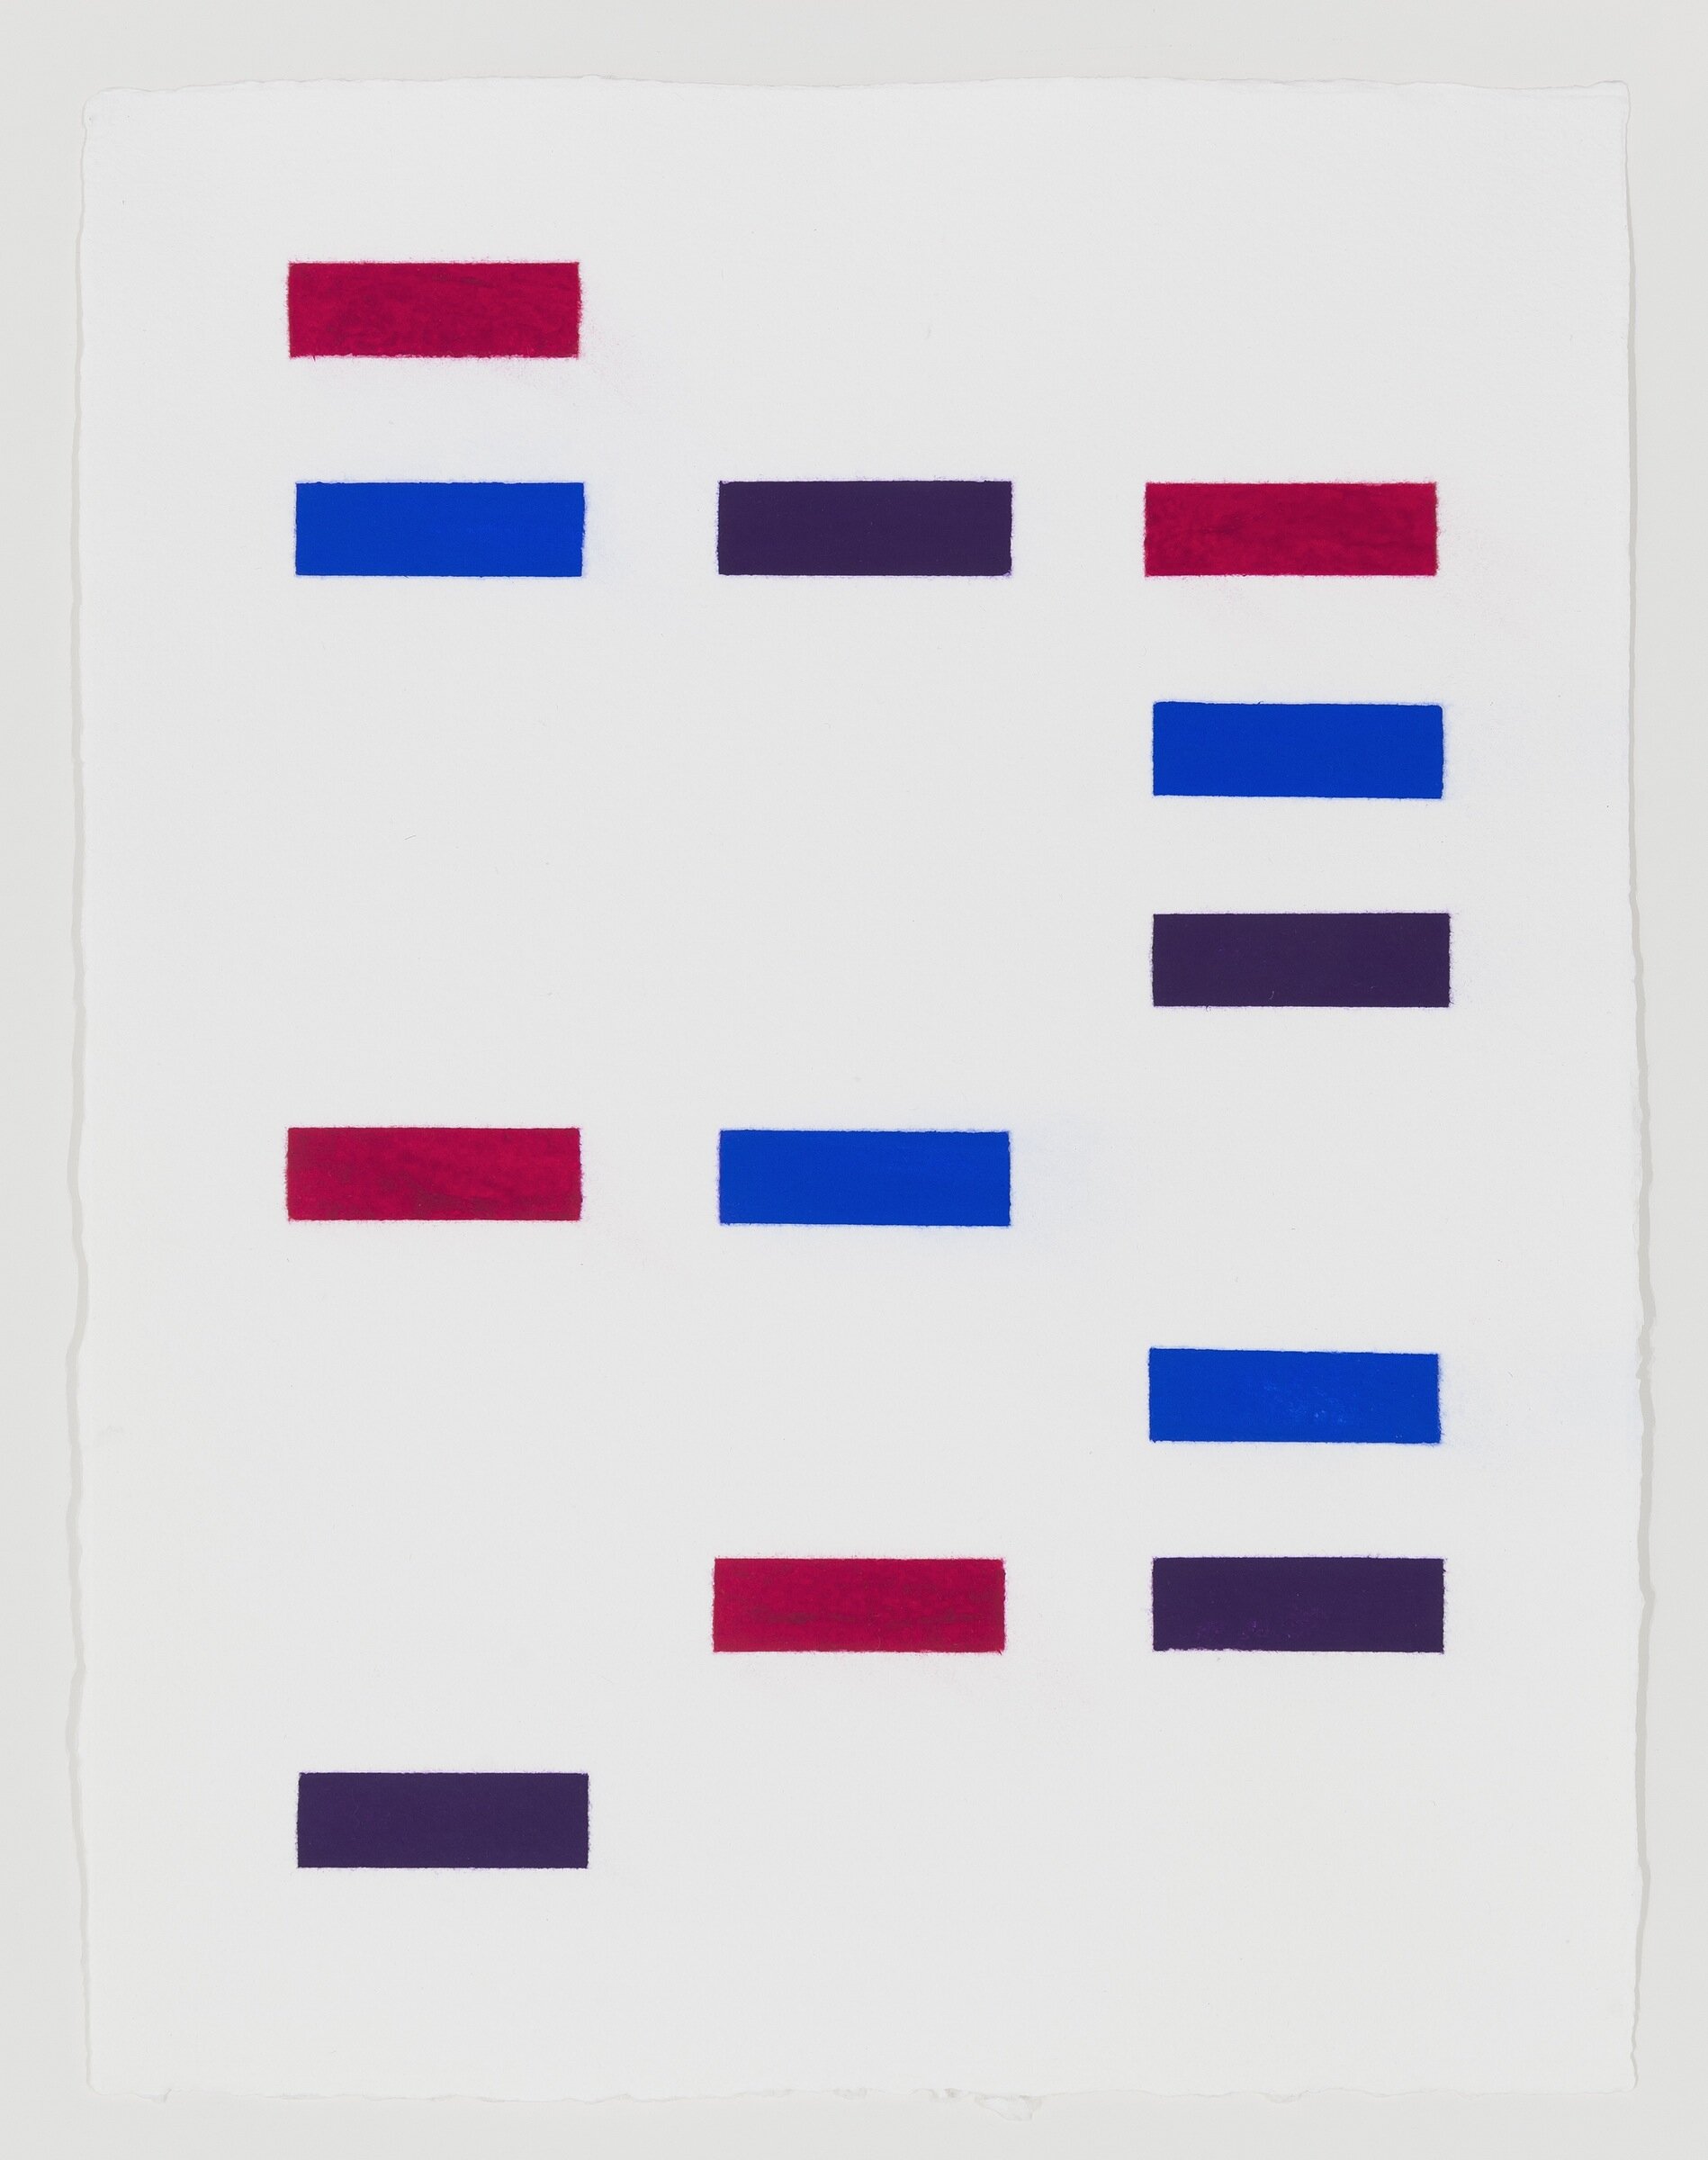  James Siena,  Logic Package: Purple,  2013-2014, Pigmented linen pulp on cotton base sheet, 16.5 x 12.75 inches.  